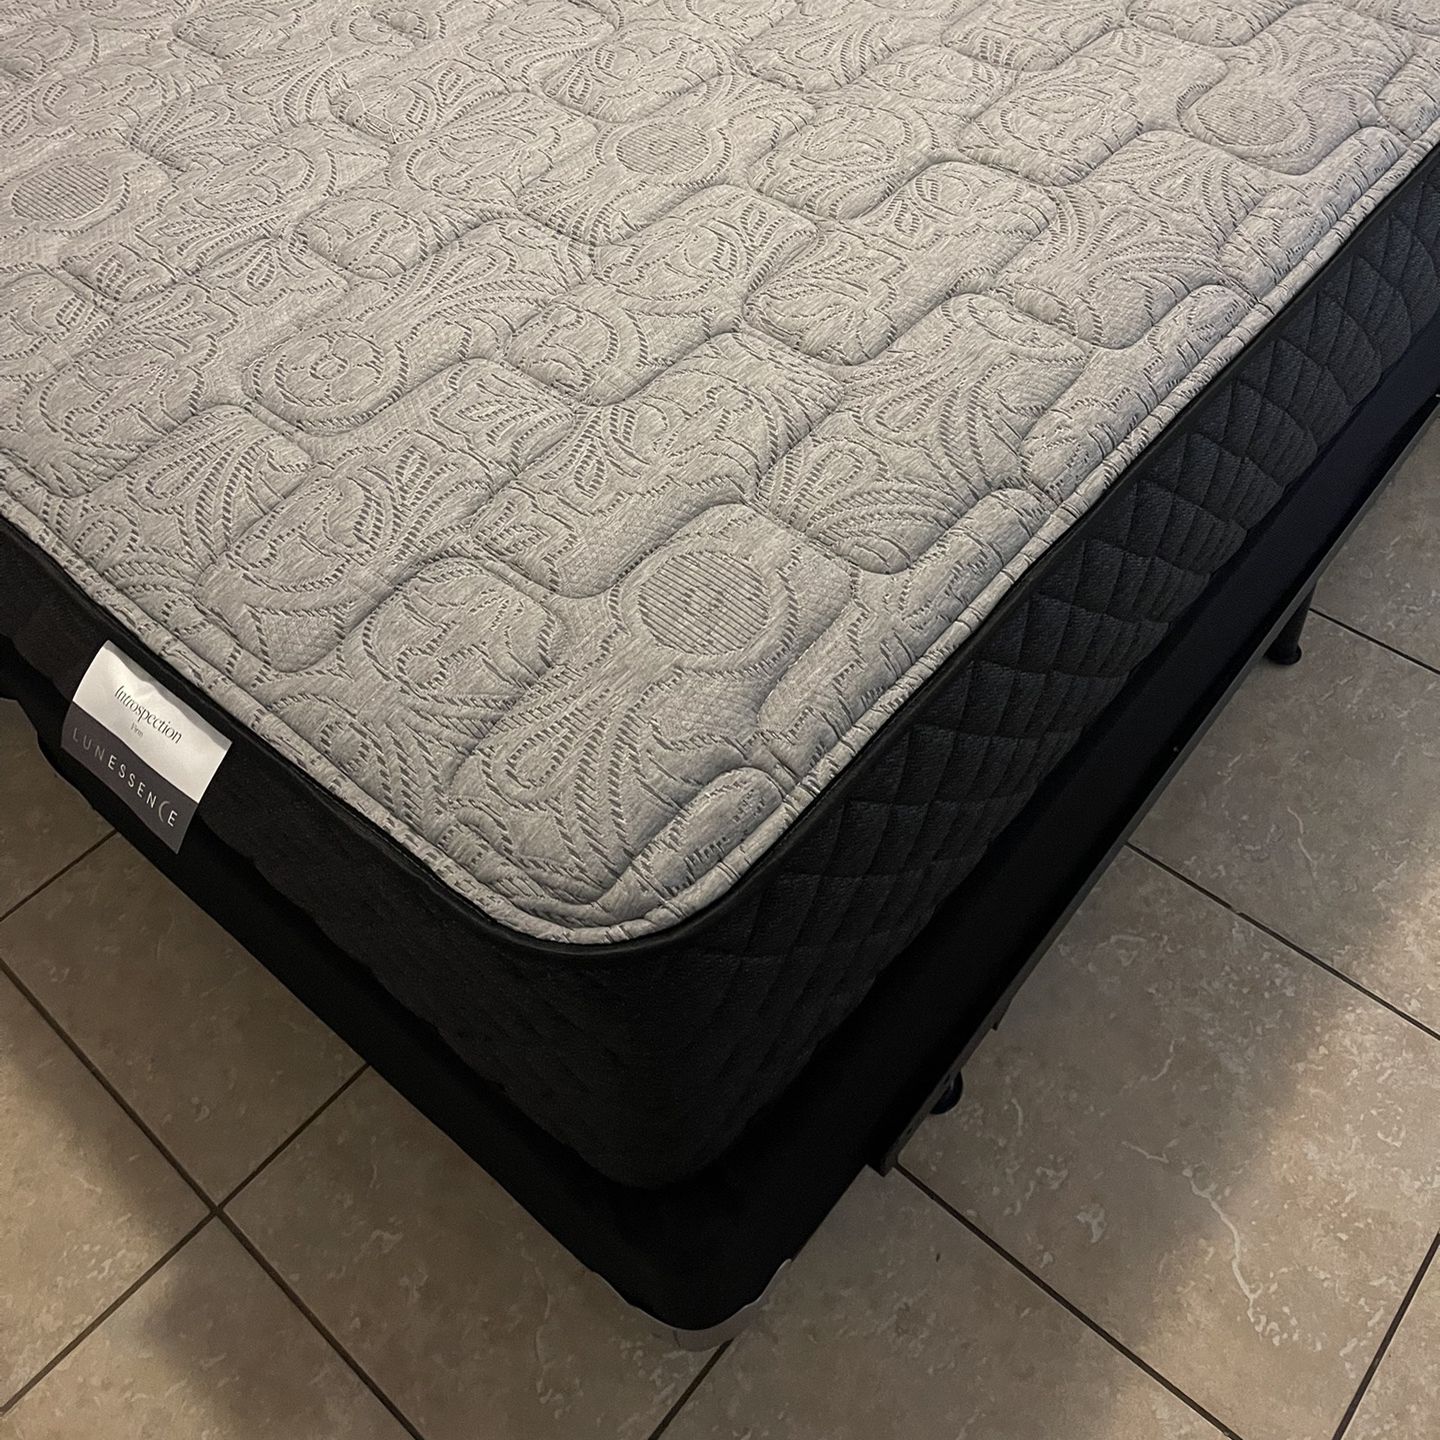 Orthopedic Extra Firm Mattresses $40 Down Take Home Today!